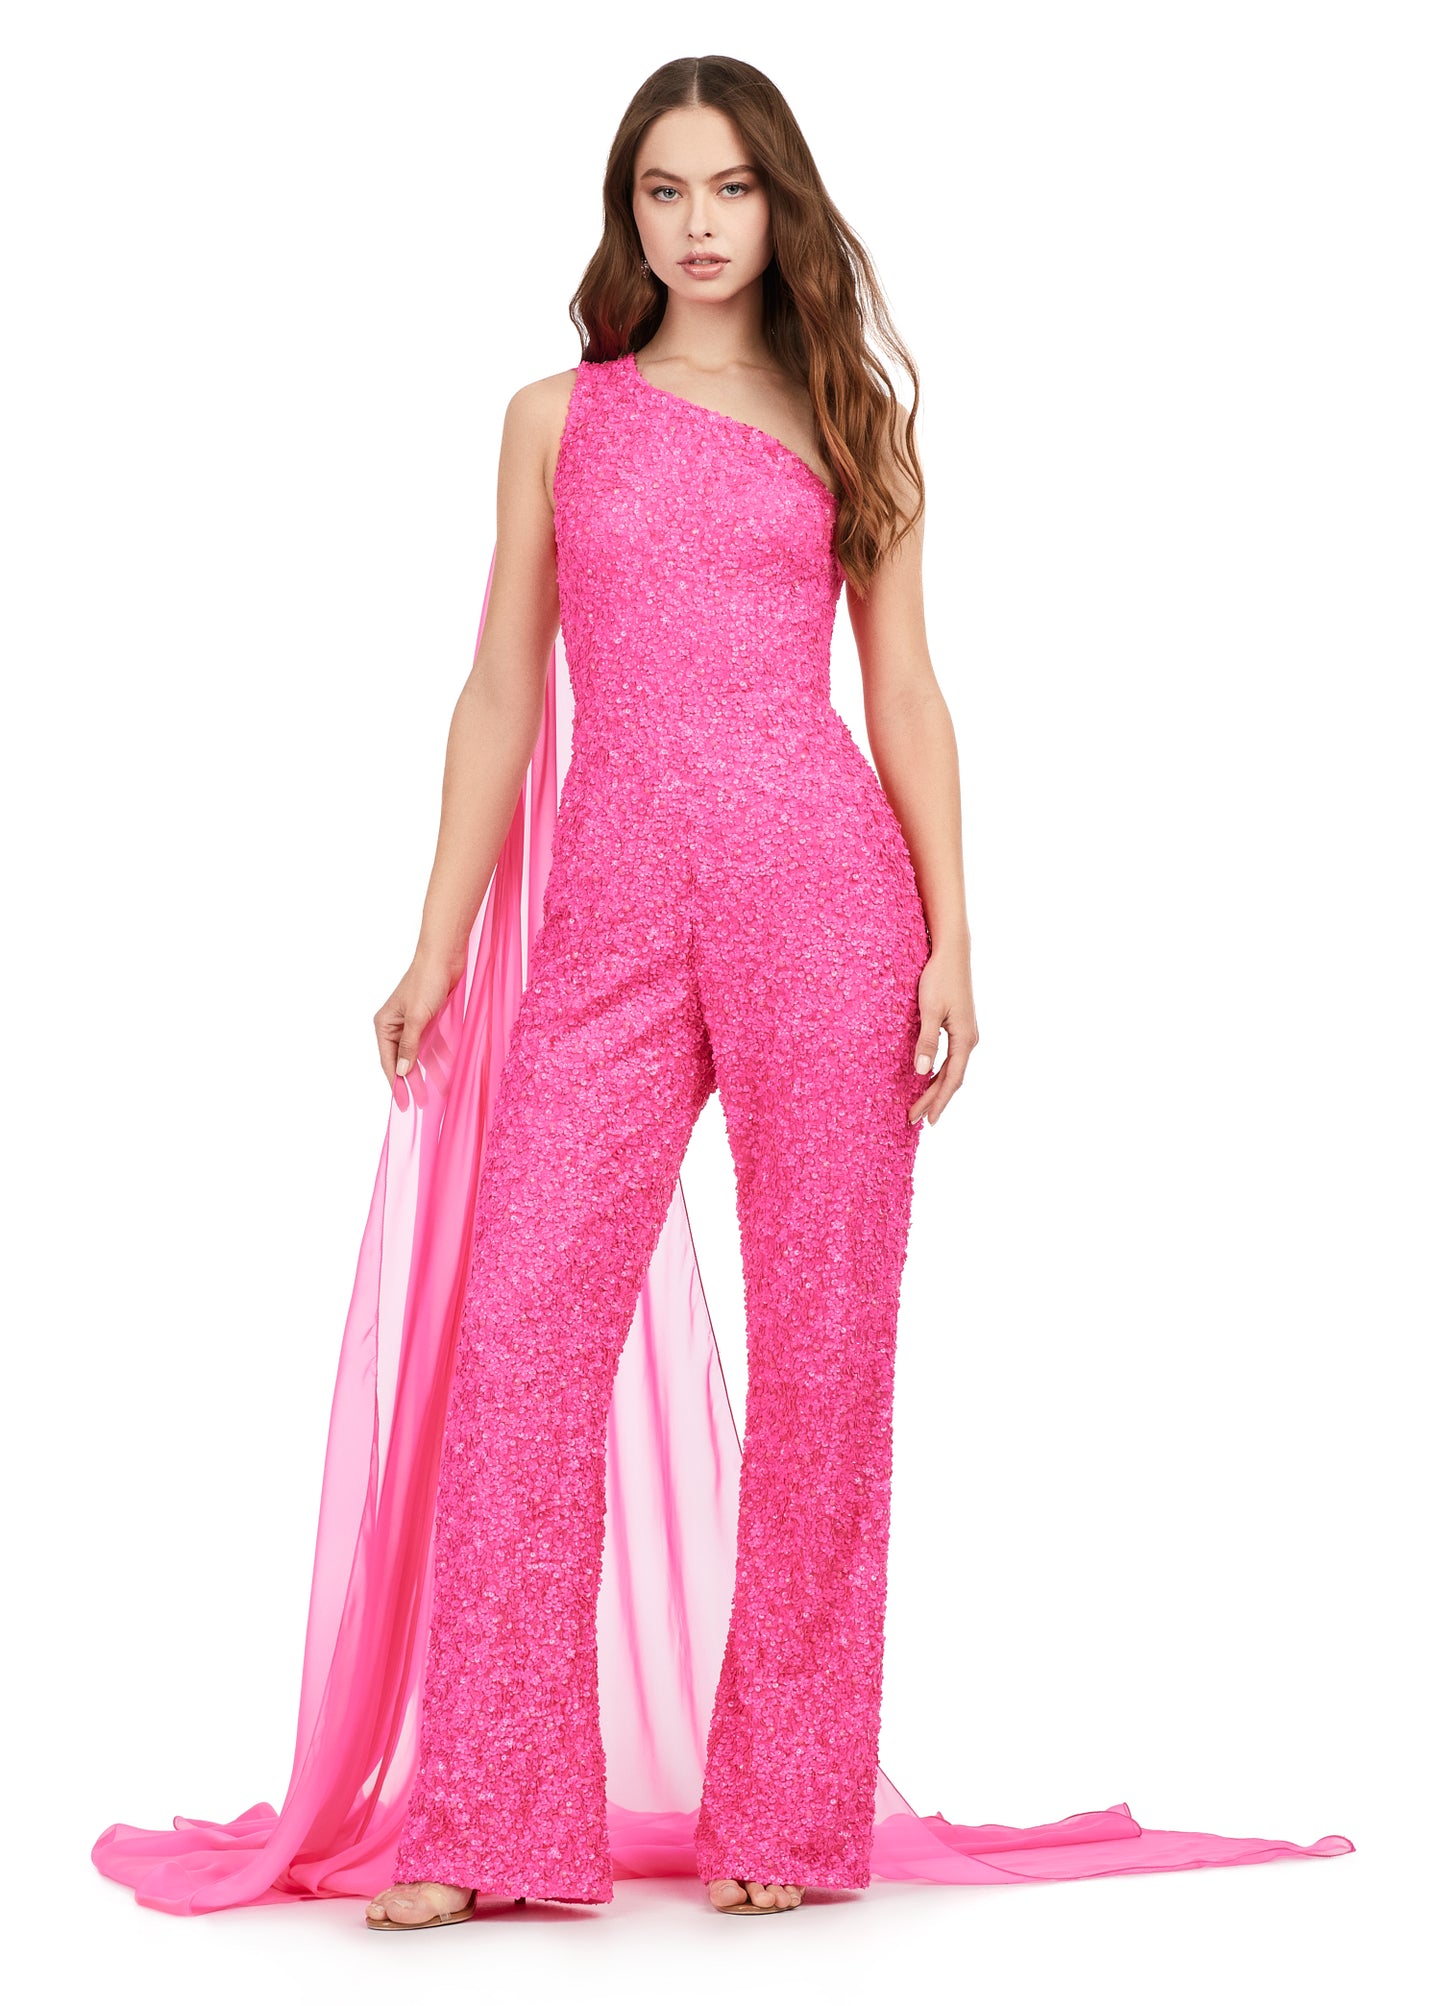 Ashley Lauren 11384 Fully Beaded With Removable Chiffon Cape One Shoulder Open Back Jumpsuit. Fall in love with this eye catching sequin jumpsuit! The one shoulder neckline is complete with a removable cape. The open back is adorned with sequin straps.